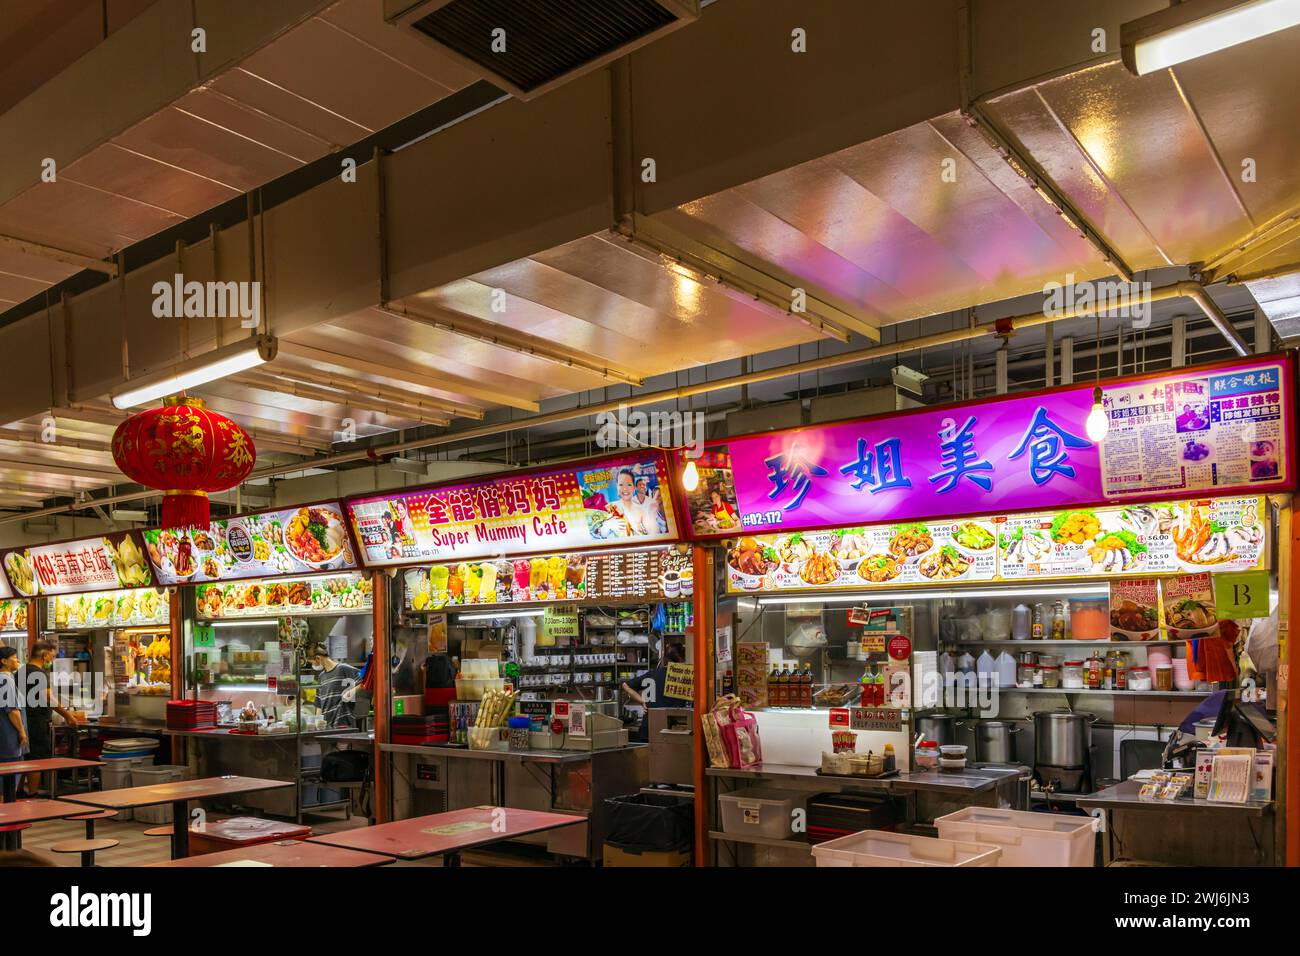 Traditional Asian food stalls in Hawker Center, Chinatown, Singapore Stock Photo